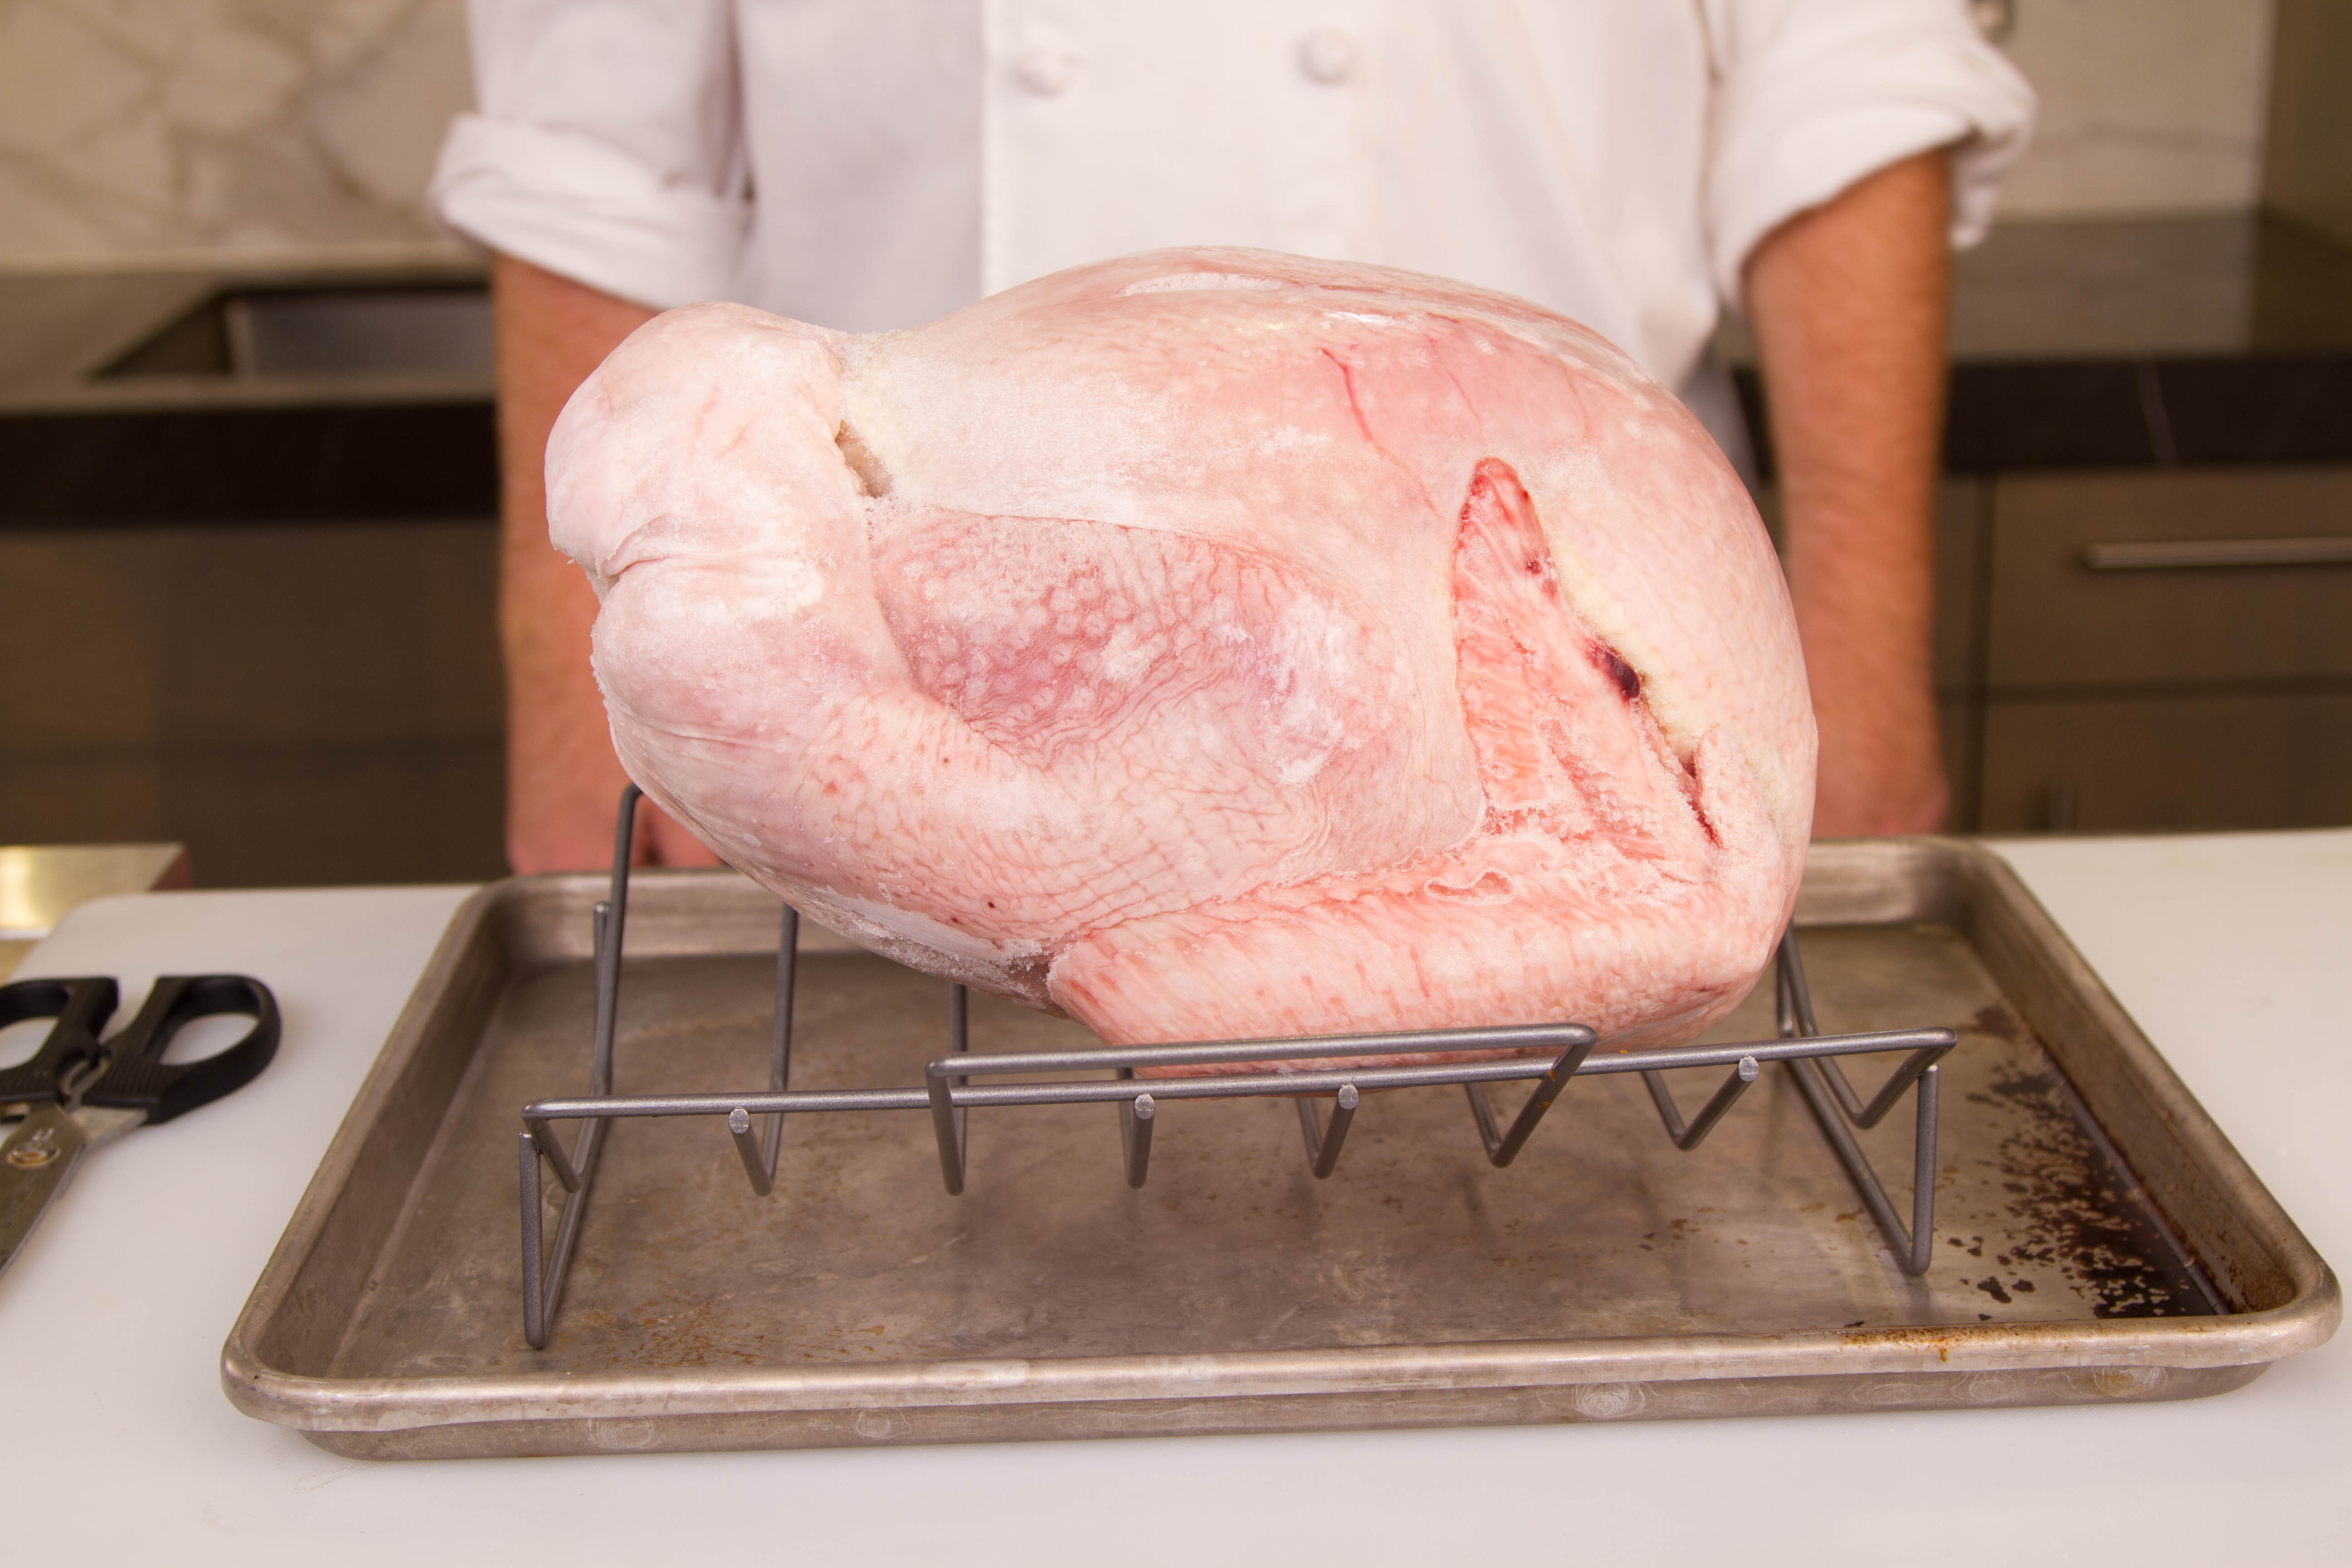 How long to thaw a turkey?